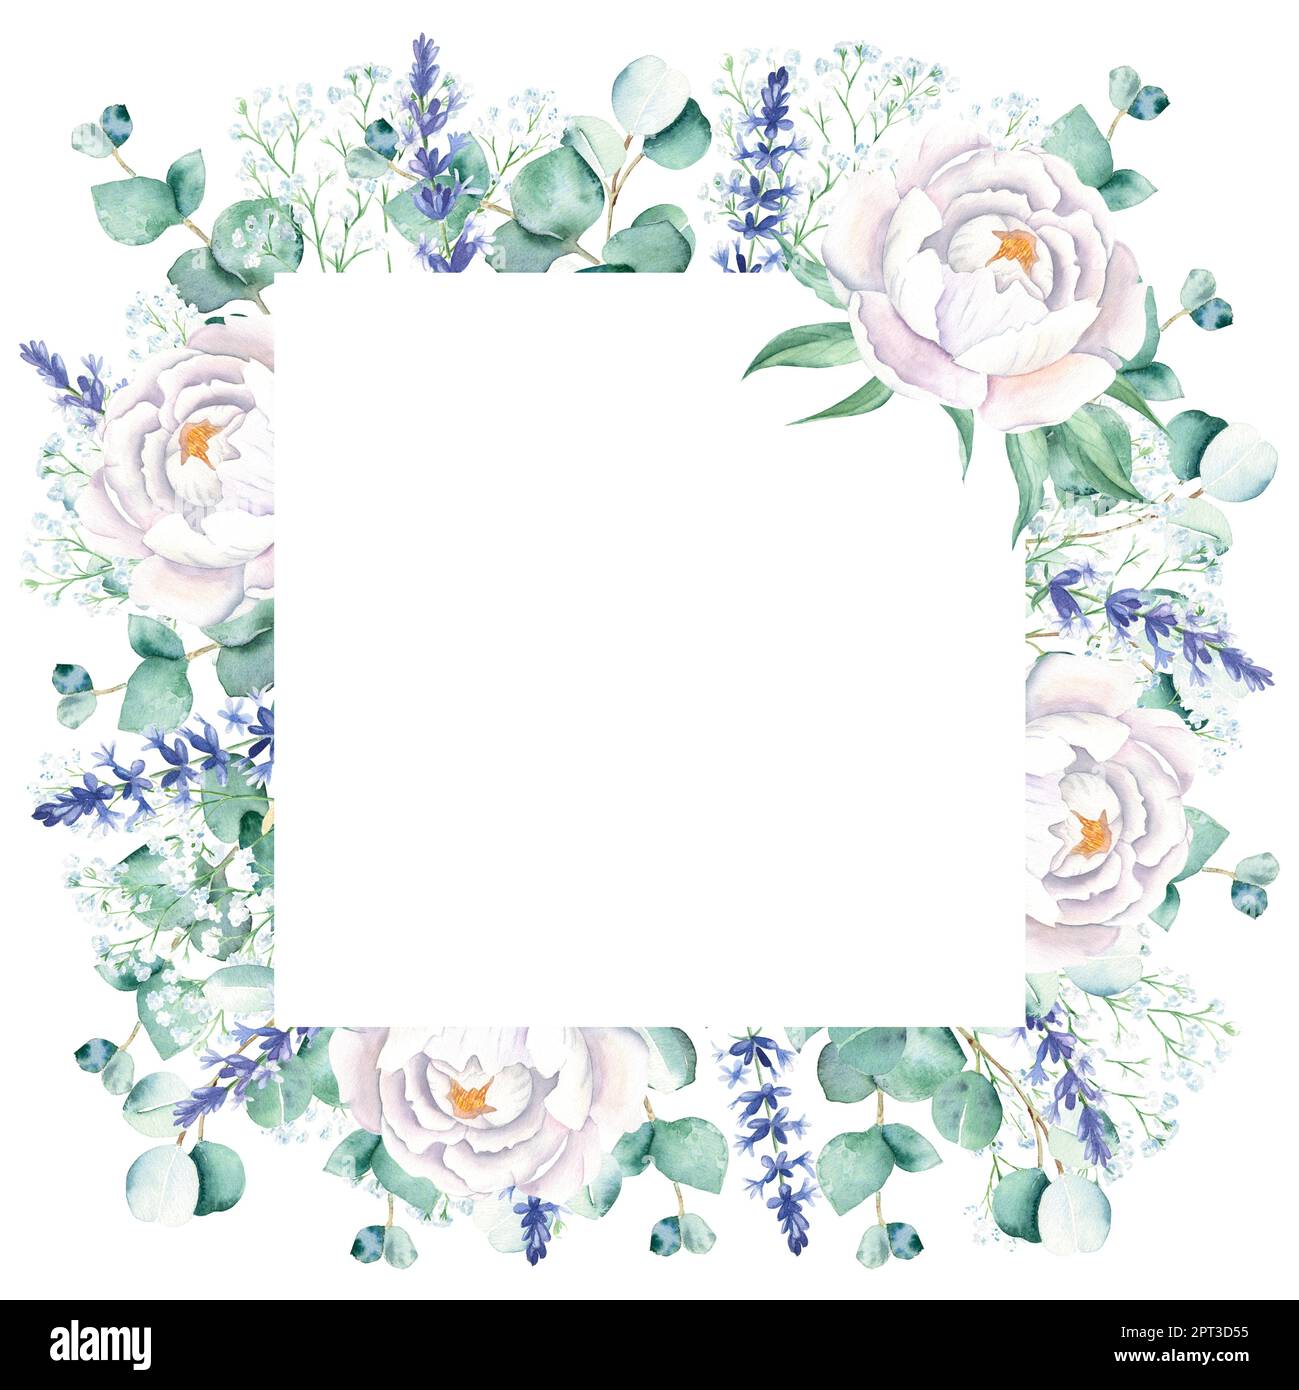 Watercolor square frame, white peonies, eucalyptus, gypsophila and lavender branches. Hand drawn botanical illustration isolated on white background Stock Photo